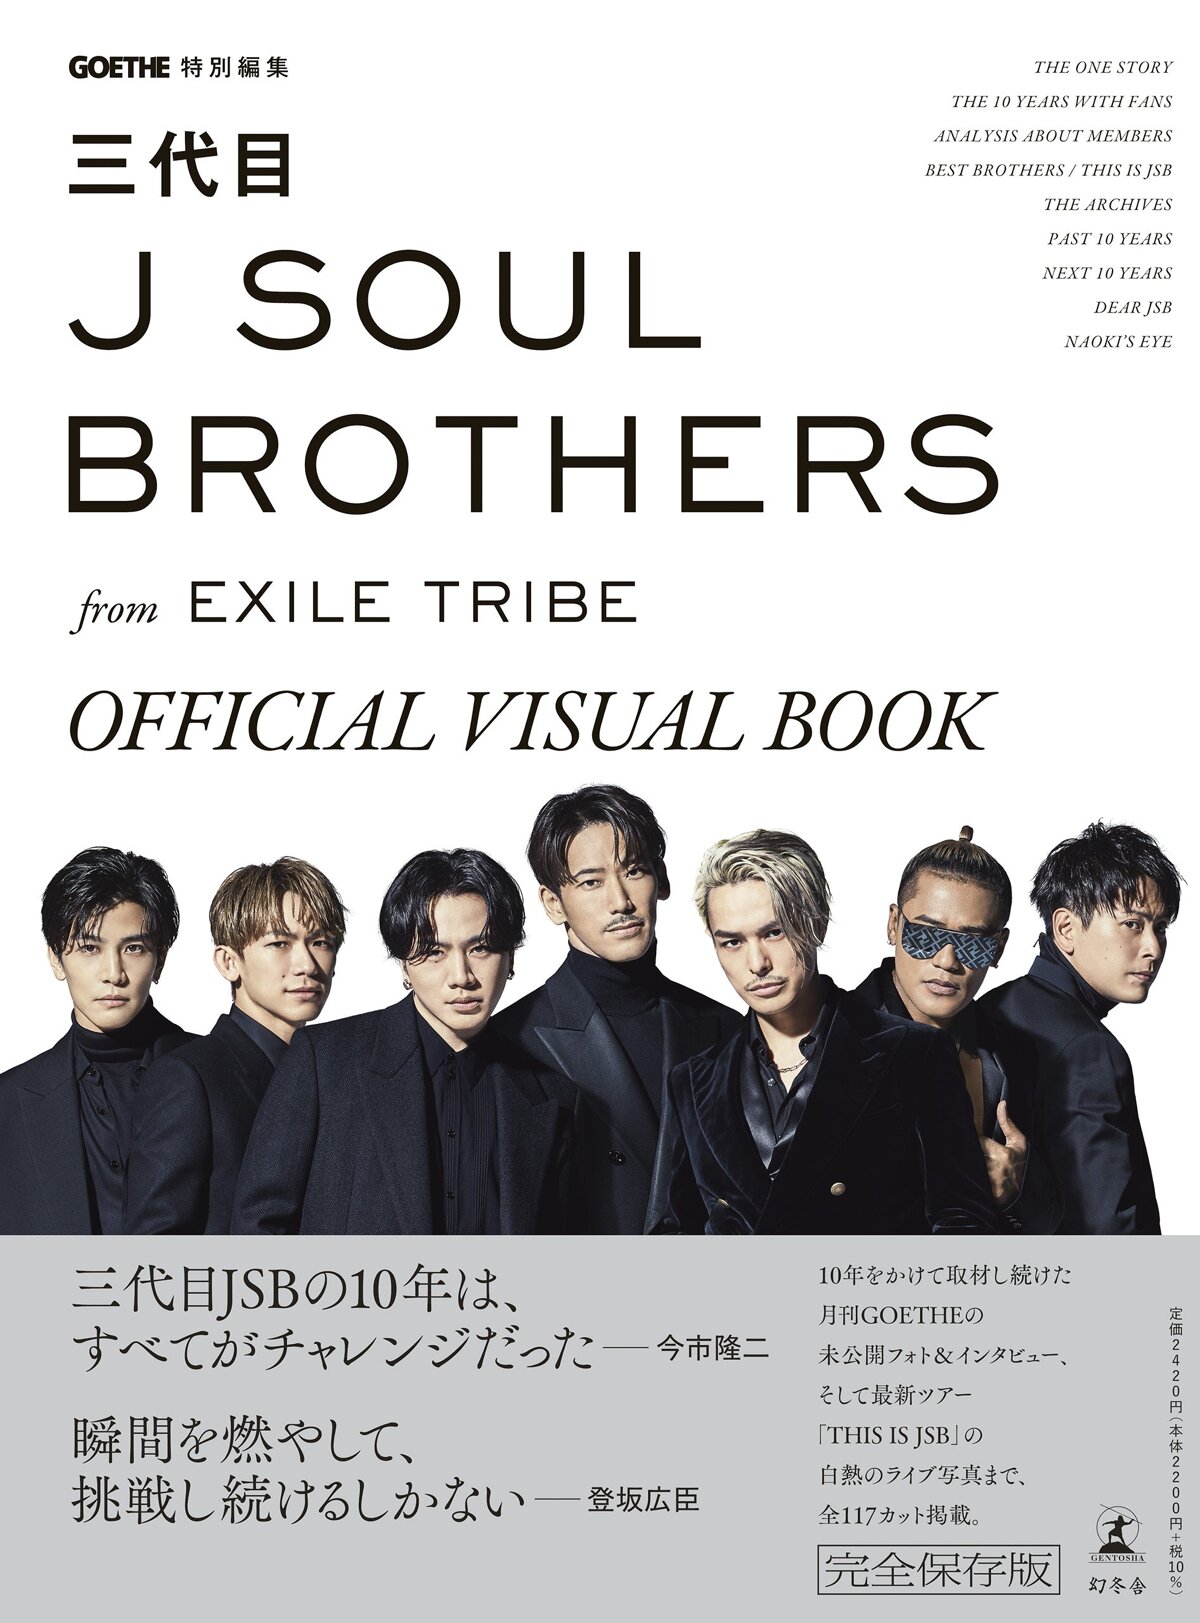 GOETHE特別編集 三代目 J SOUL BROTHERS from EXILE TRIBE OFFICIAL VISUAL BOOK